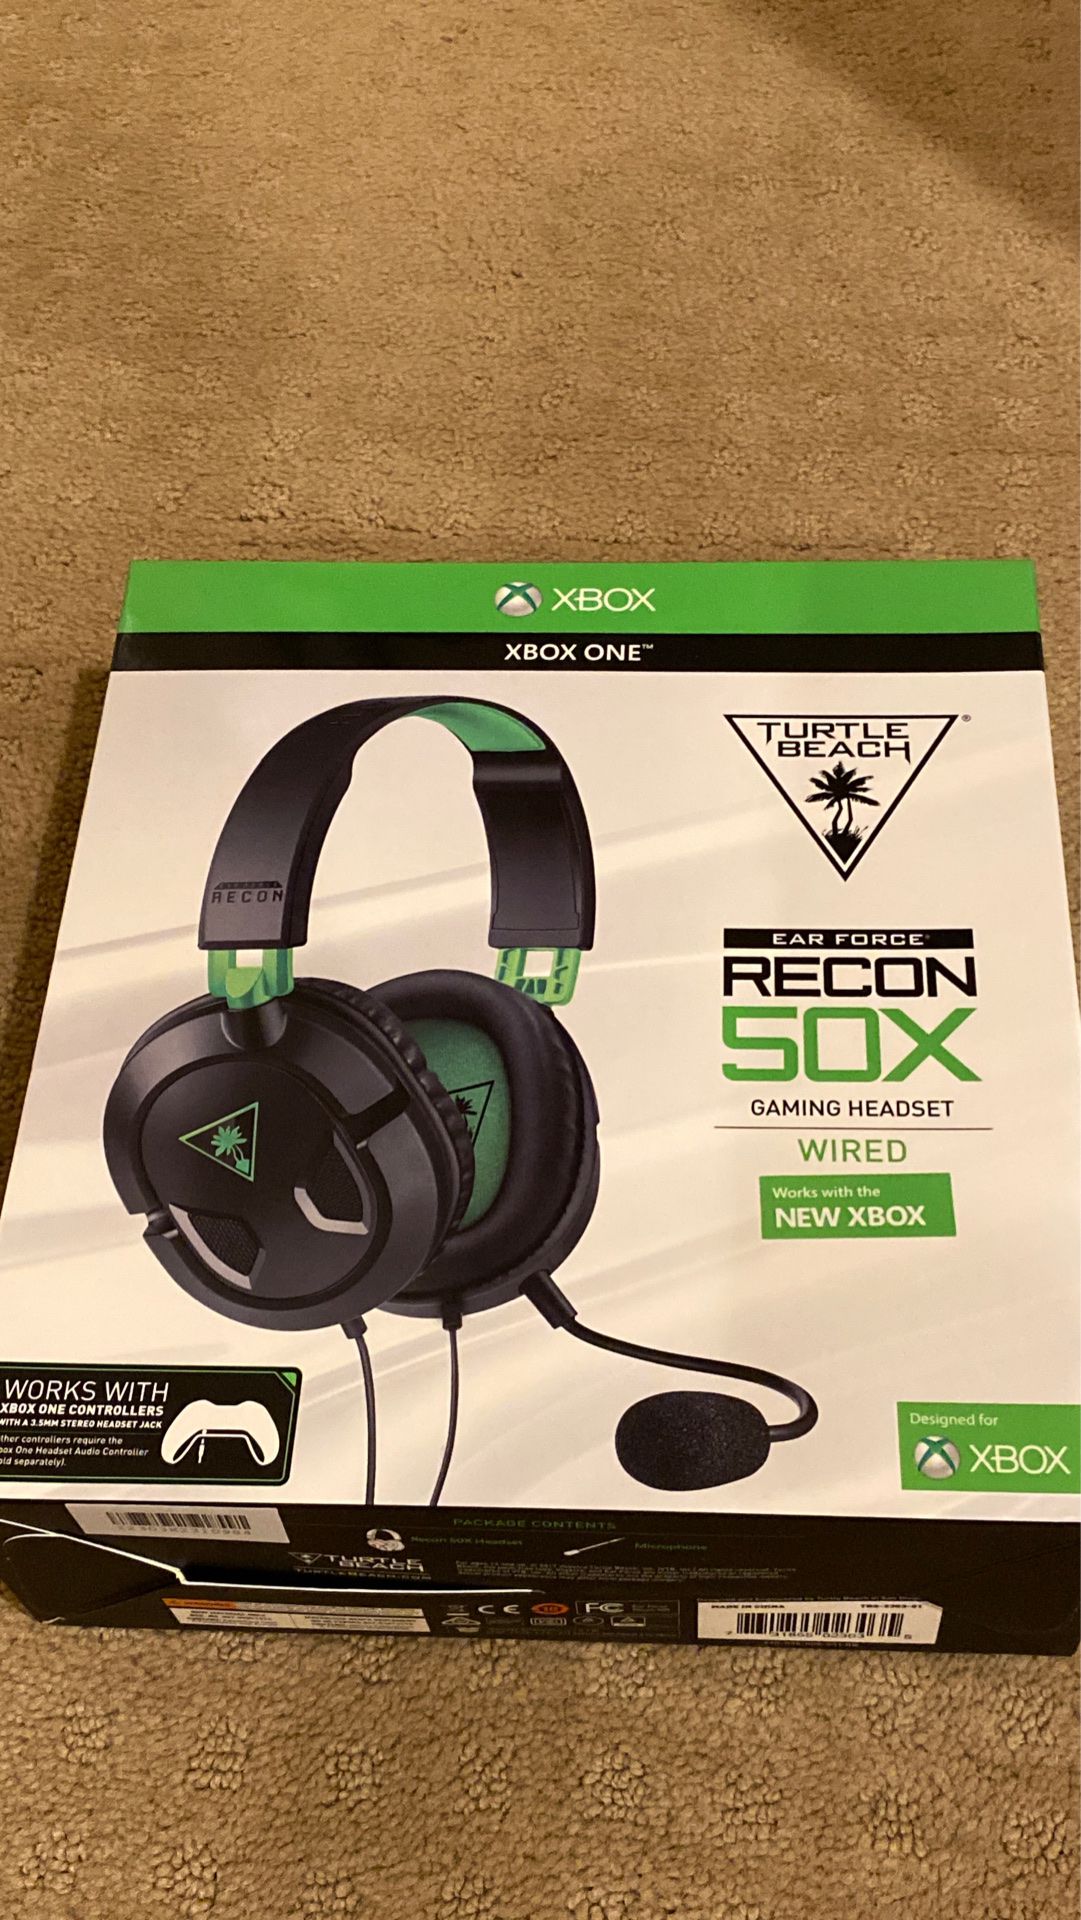 XBOX One Turtle Beach Gaming Headset (Wired)